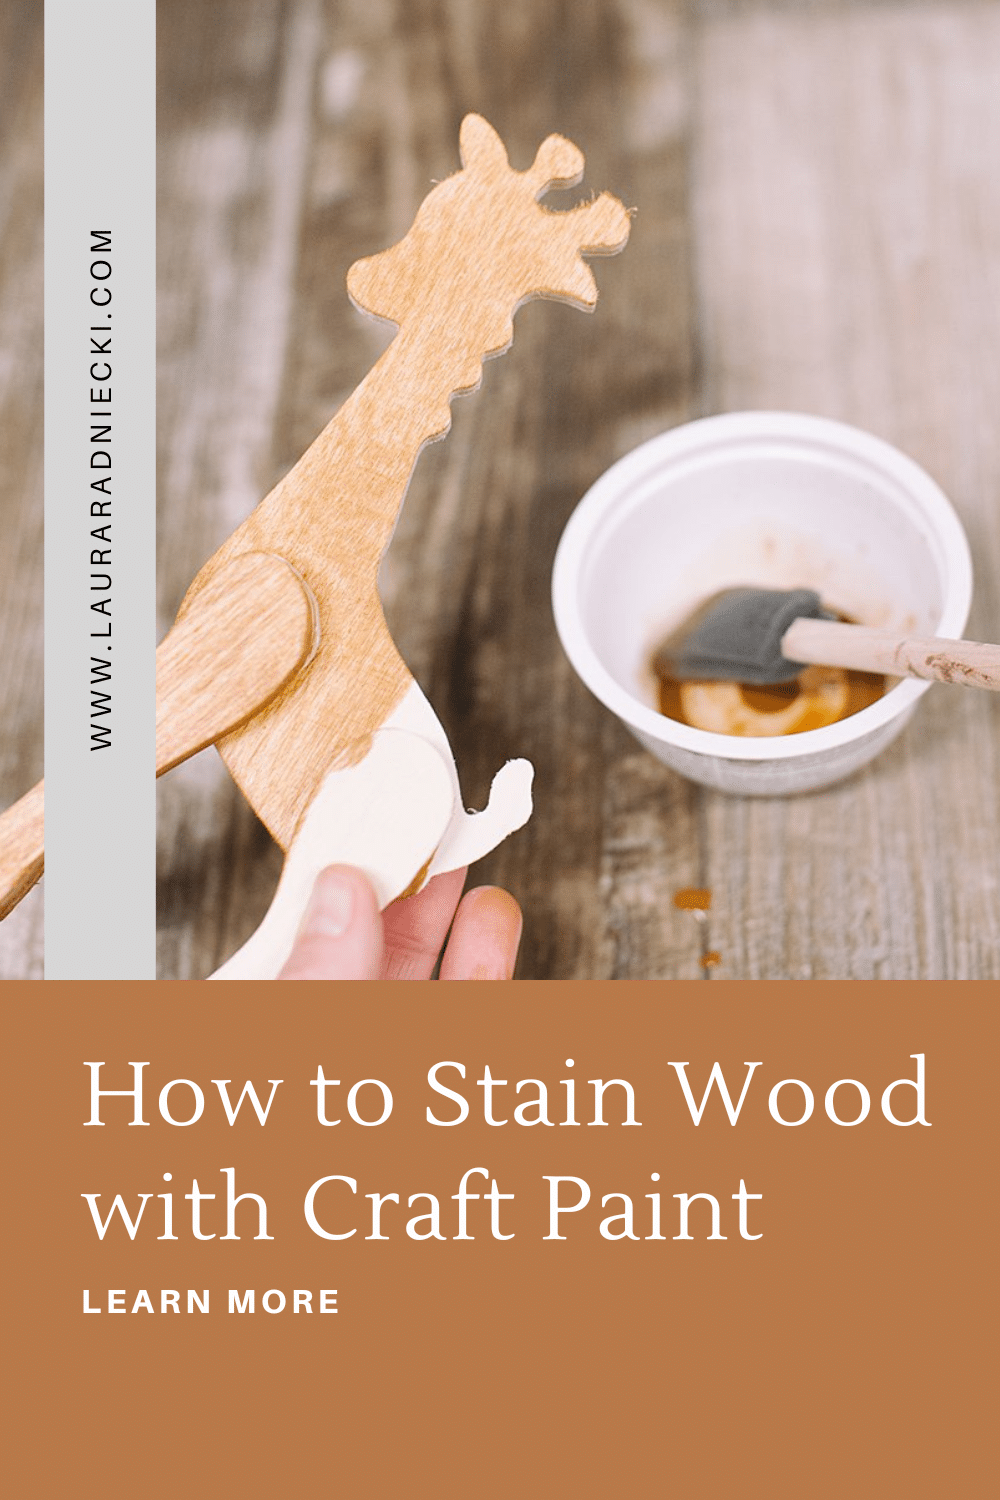 How to Stain Wood with Craft Paint